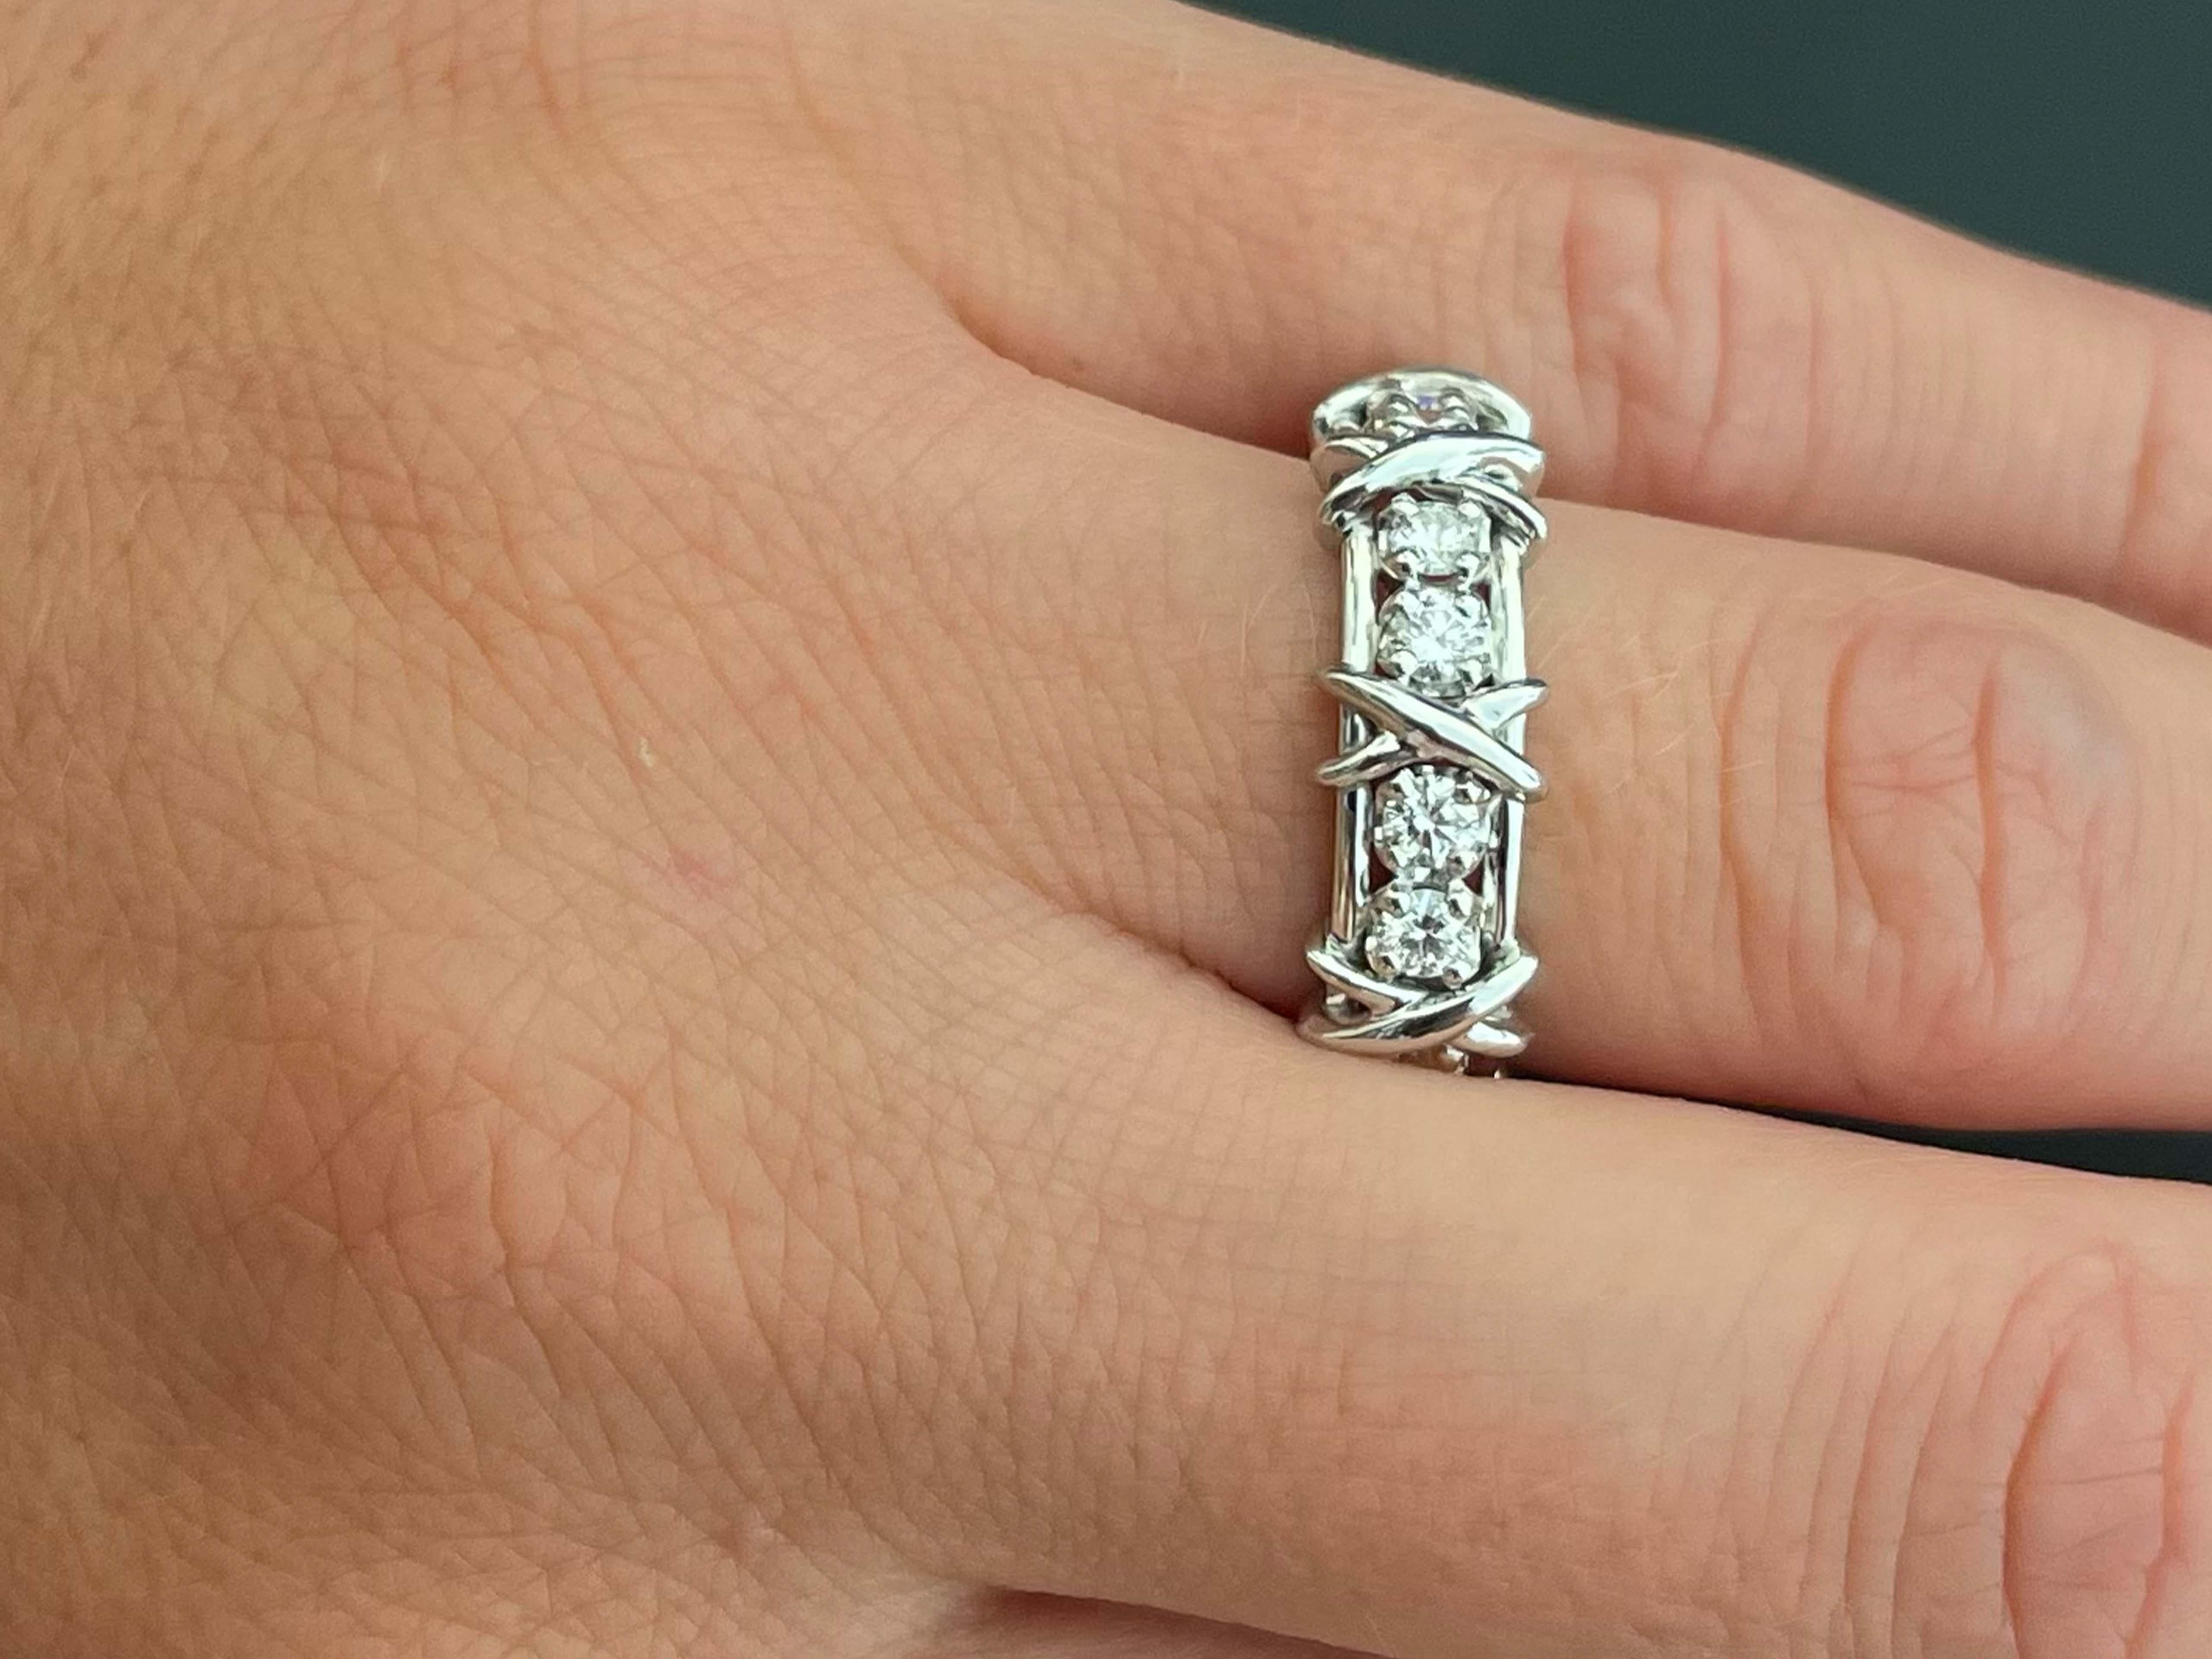 Authentic Tiffany & Co. Schlumberger Sixteen Stone Platinum Ring. Jean Schlumberger’s visionary creations are among the world’s most intricate designs. Brilliant diamonds alternate with platinum X's to create this dazzling design. The 16 round